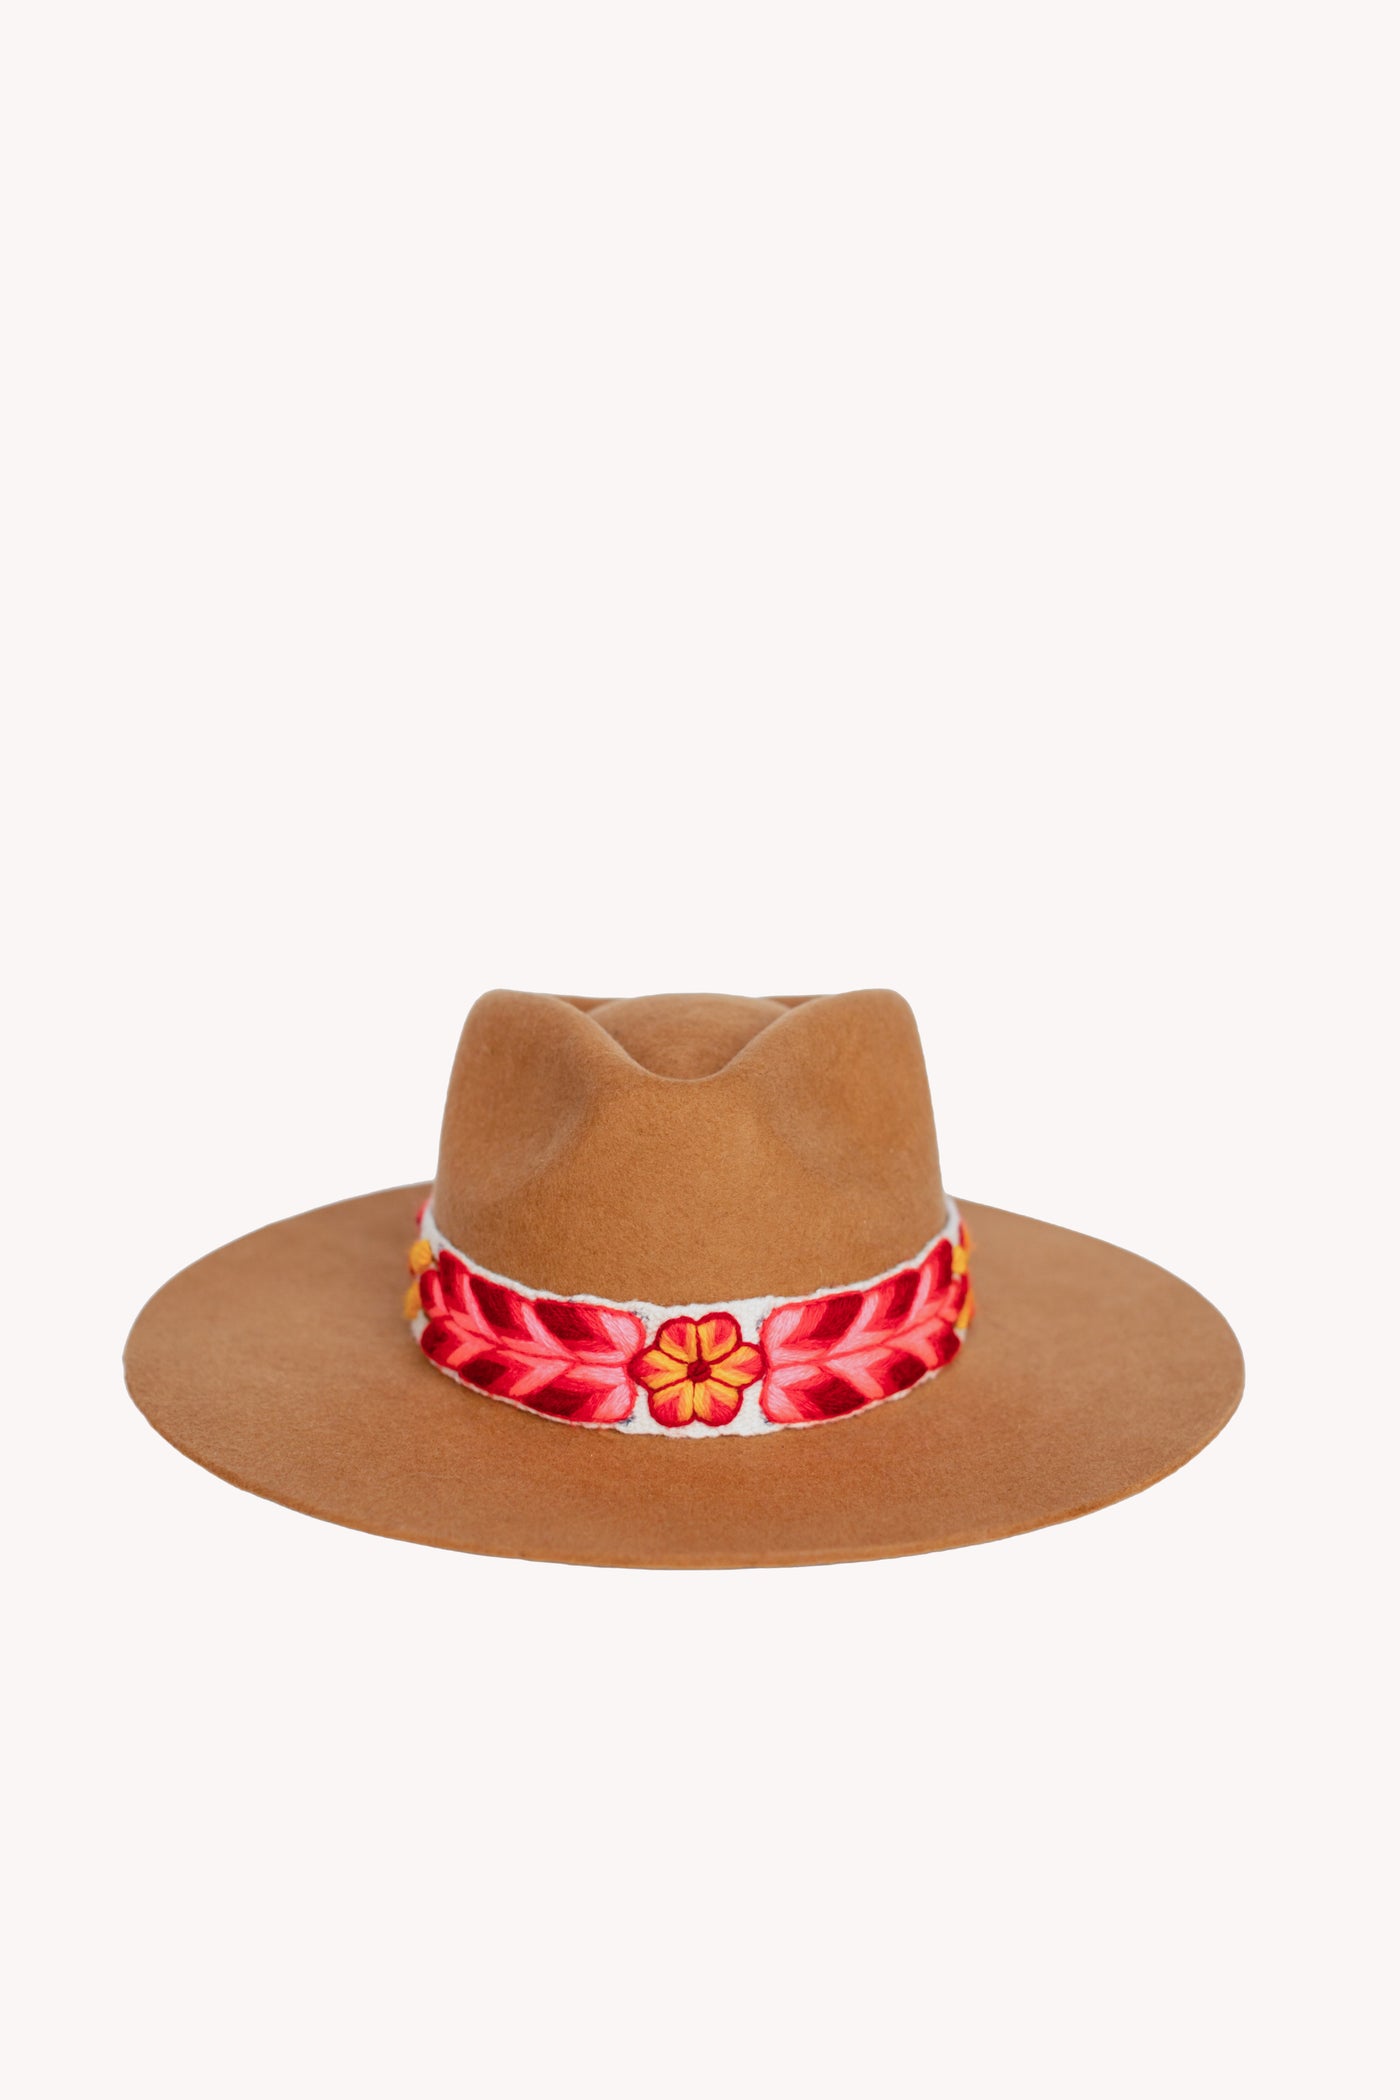 Camel Western Hat with Gratitude Intention Band Removable Intention Hat Textile Band